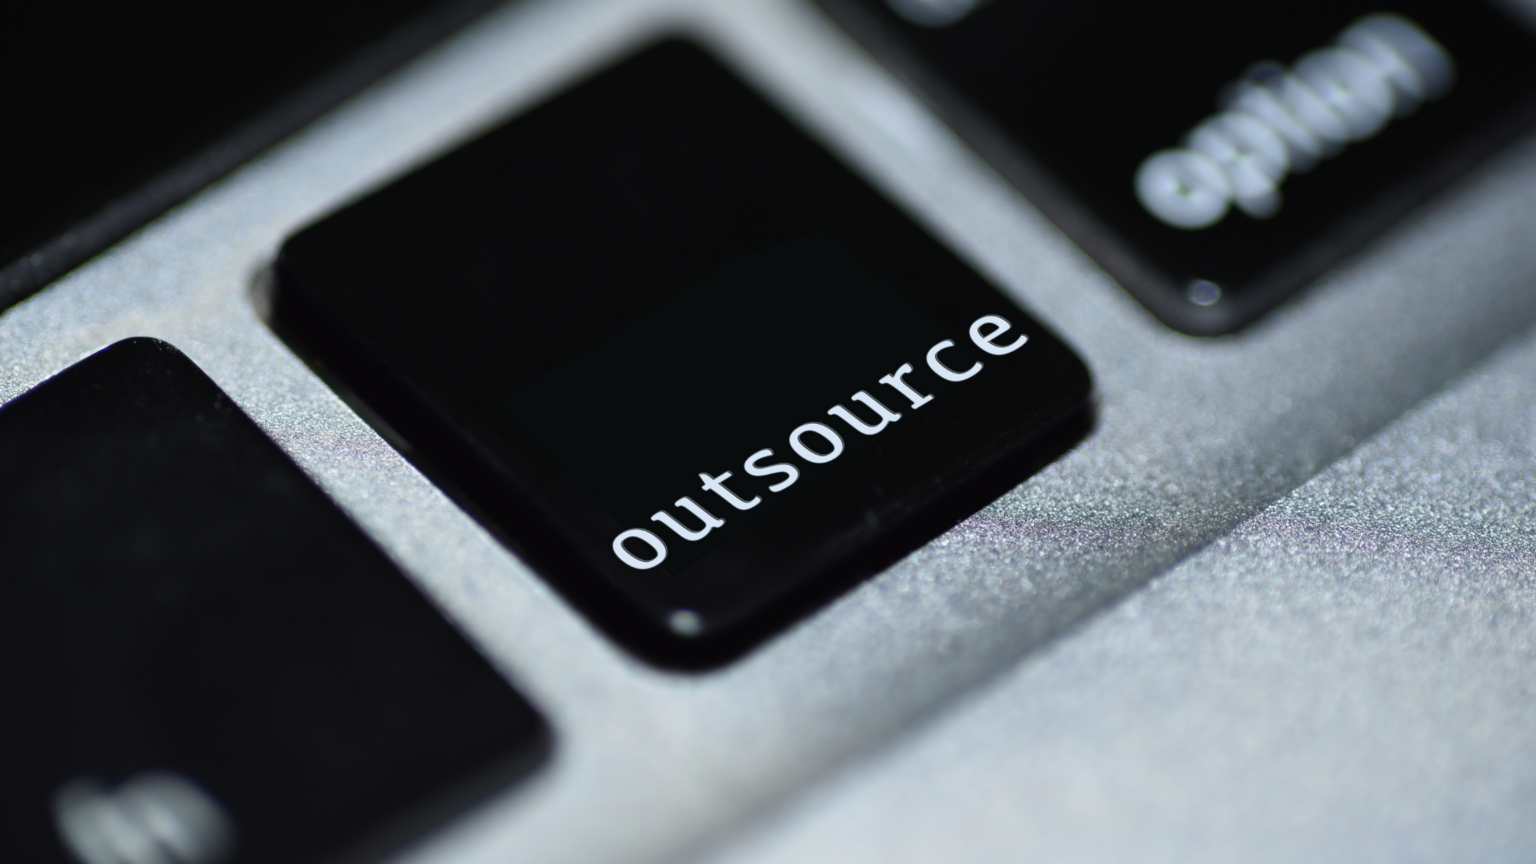 Computer keyboard in black and white with one key showing the word outsource.